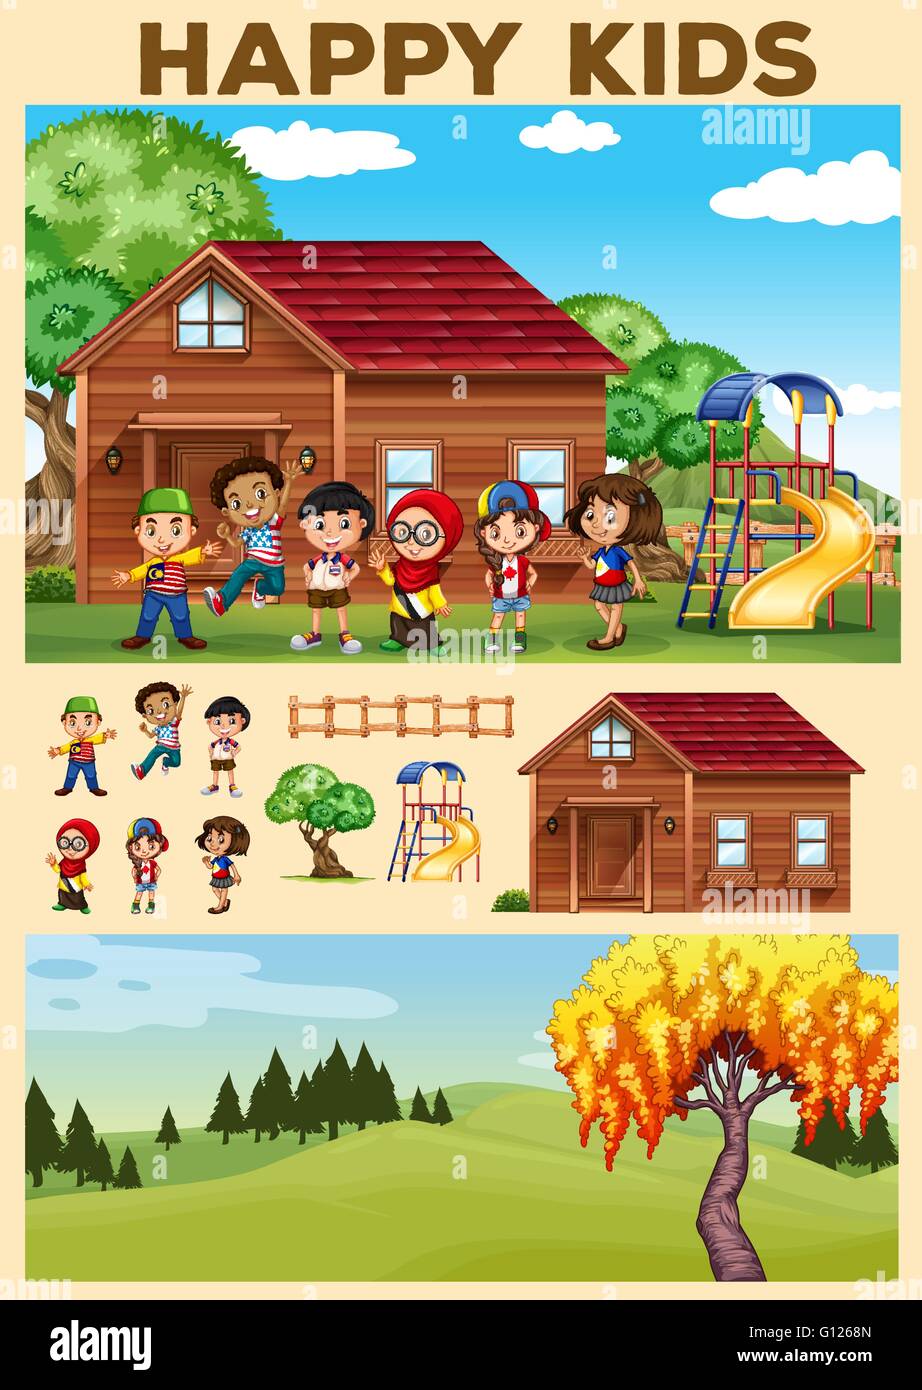 Children playing in the playground illustration Stock Vector